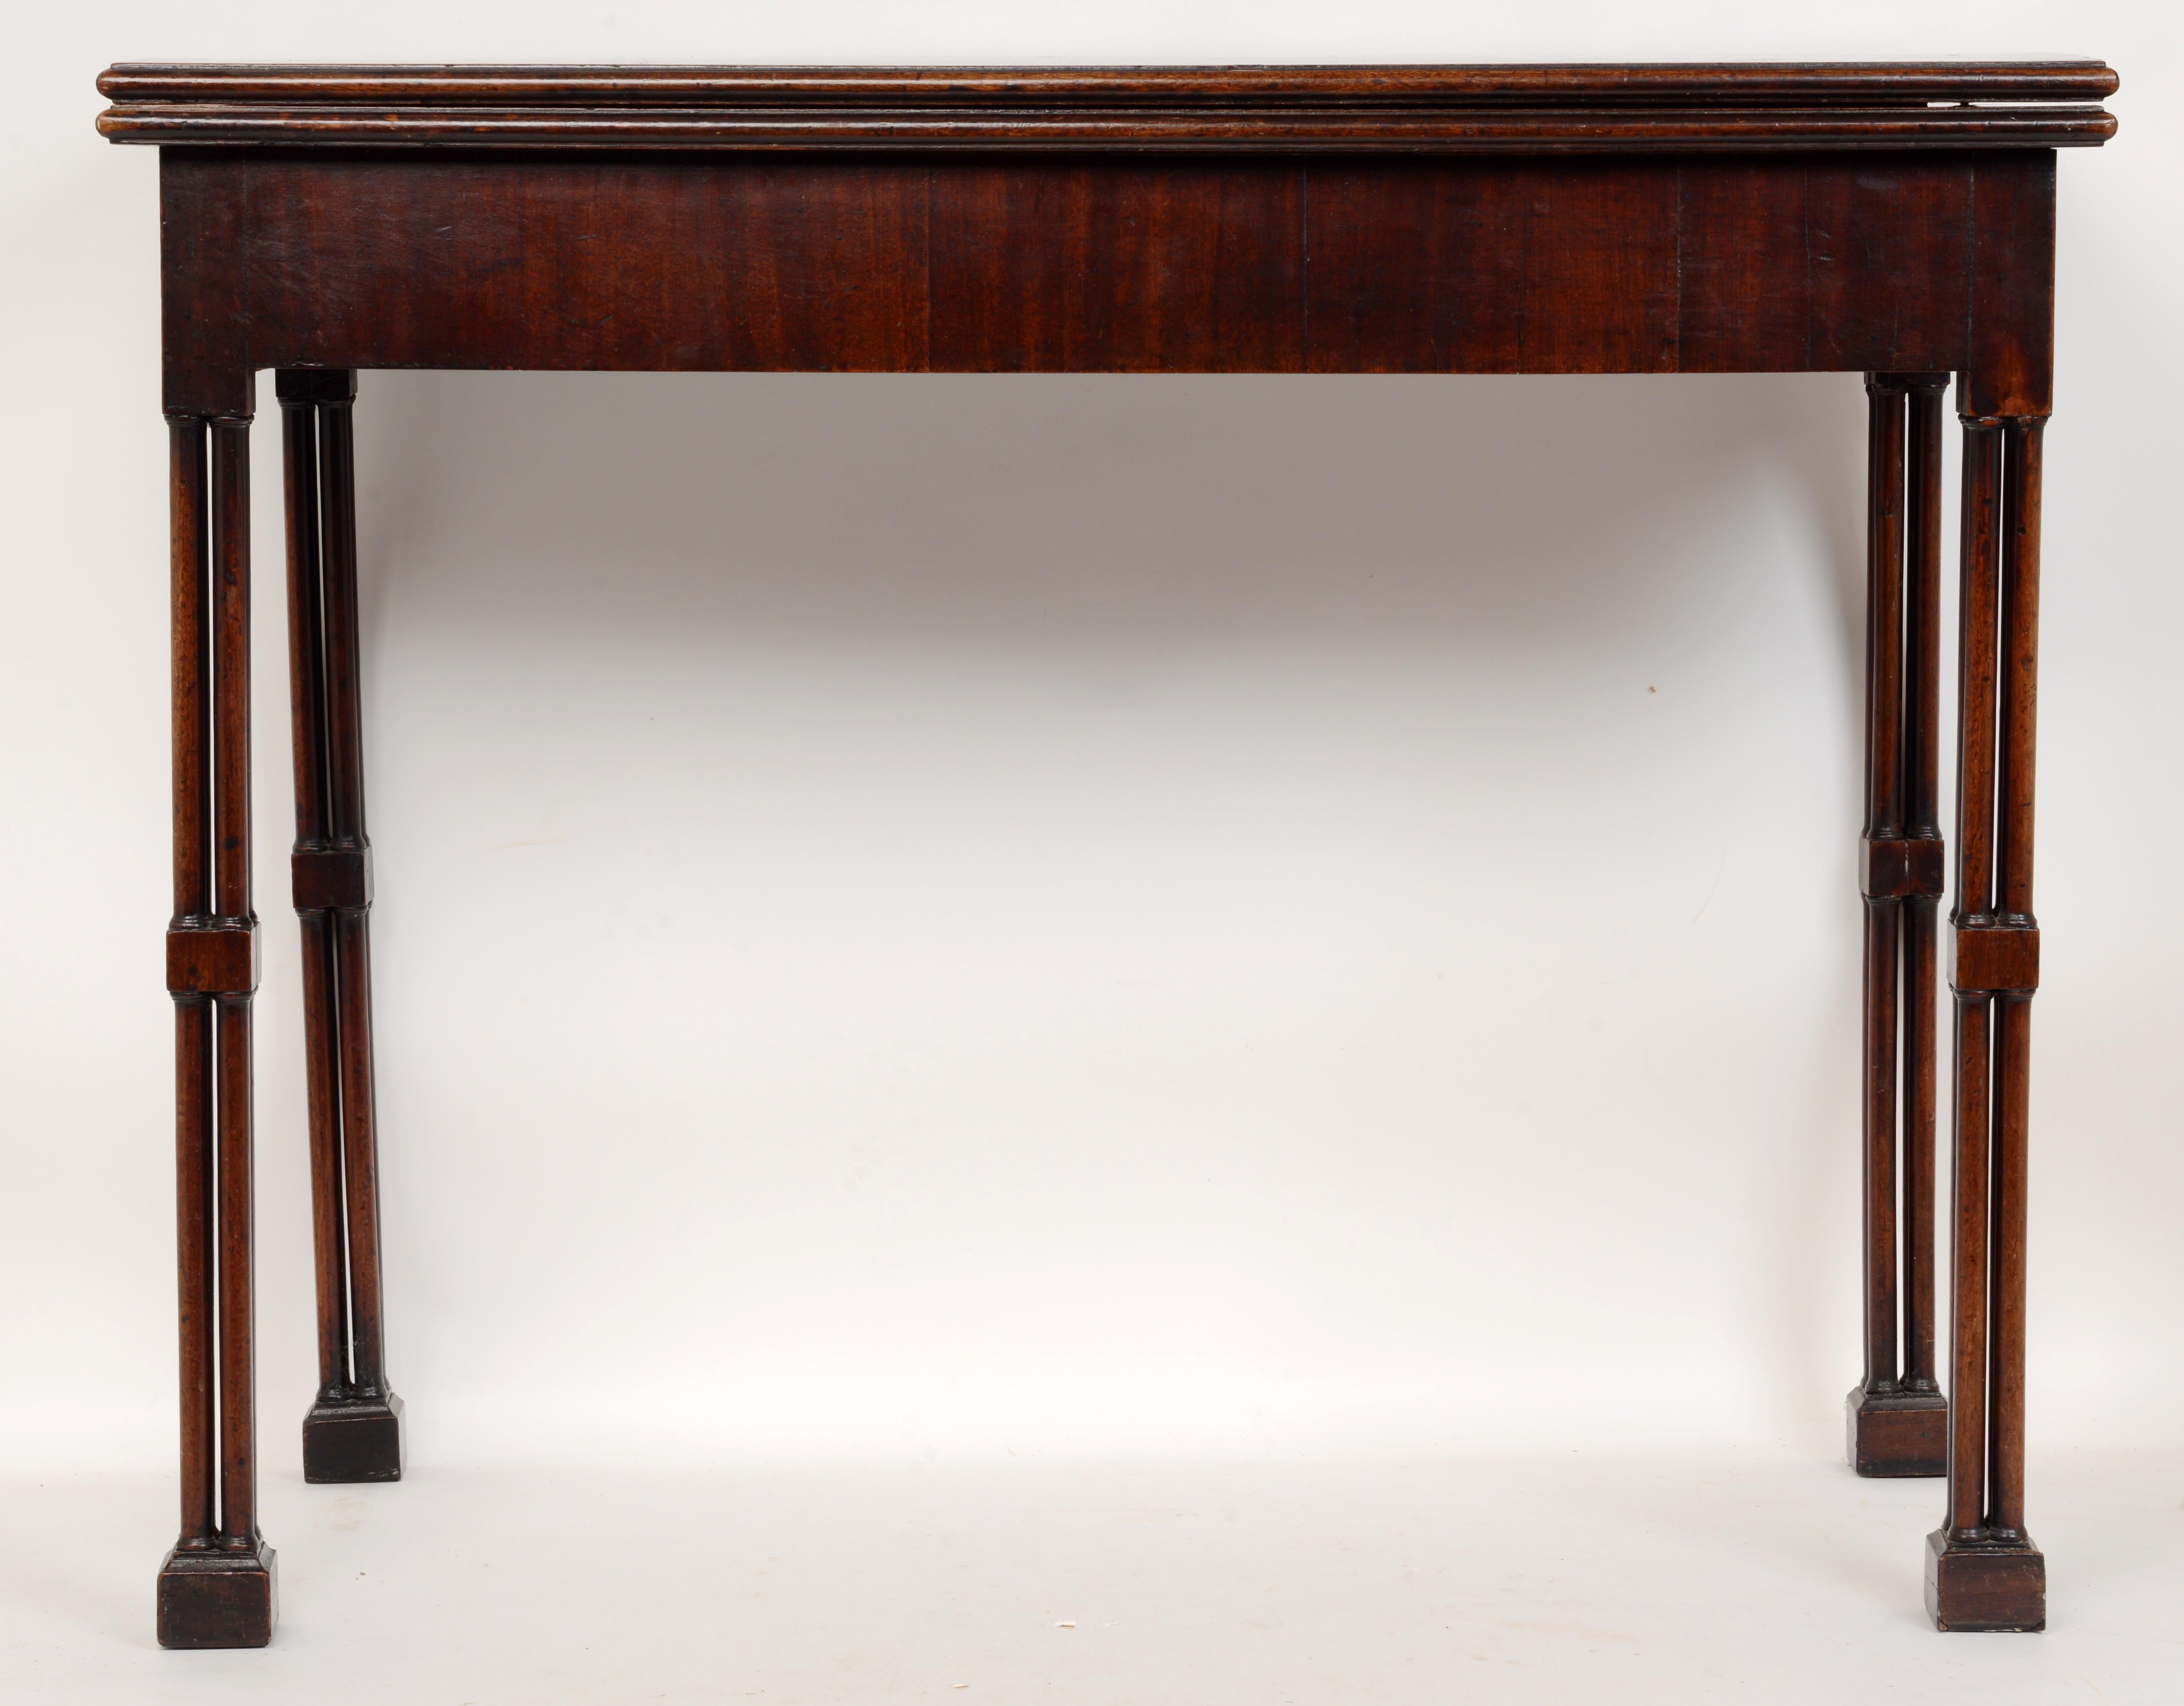 Geo III Mahogany fold-over card table with cluster-leg and concertina action c1780. The hinged Leather lined and gilt tooled top opens and is supported by hinged, concertina-action rear legs. The table is raised on cluster turned and caged legs with